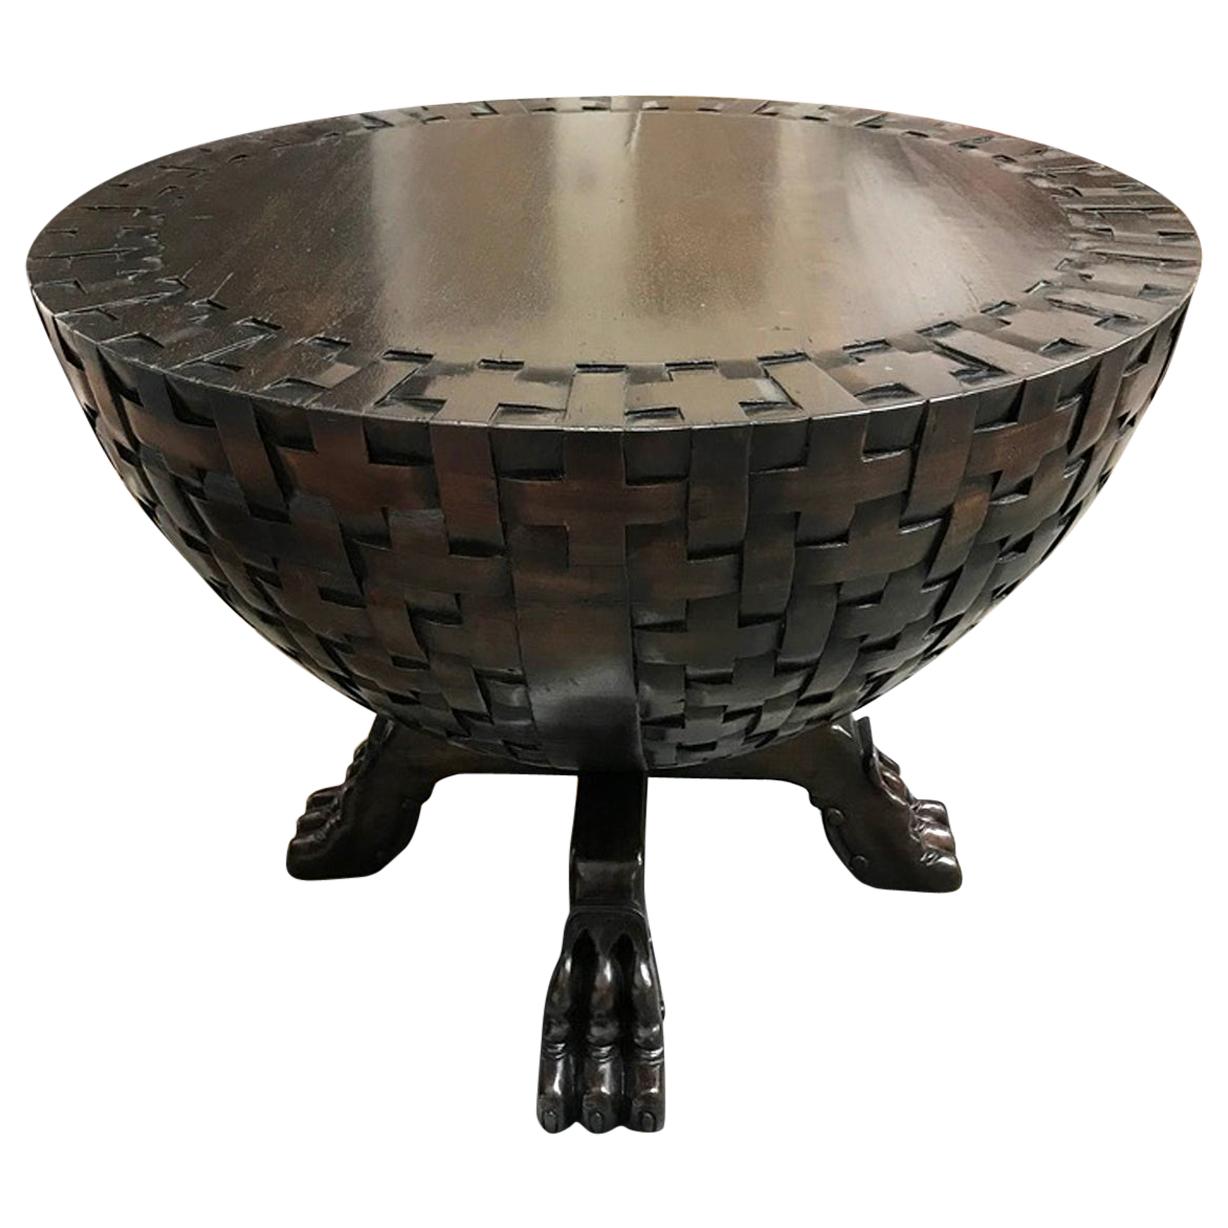 Custom Hand Carved Basketweave Table by Dos Gallos Studio